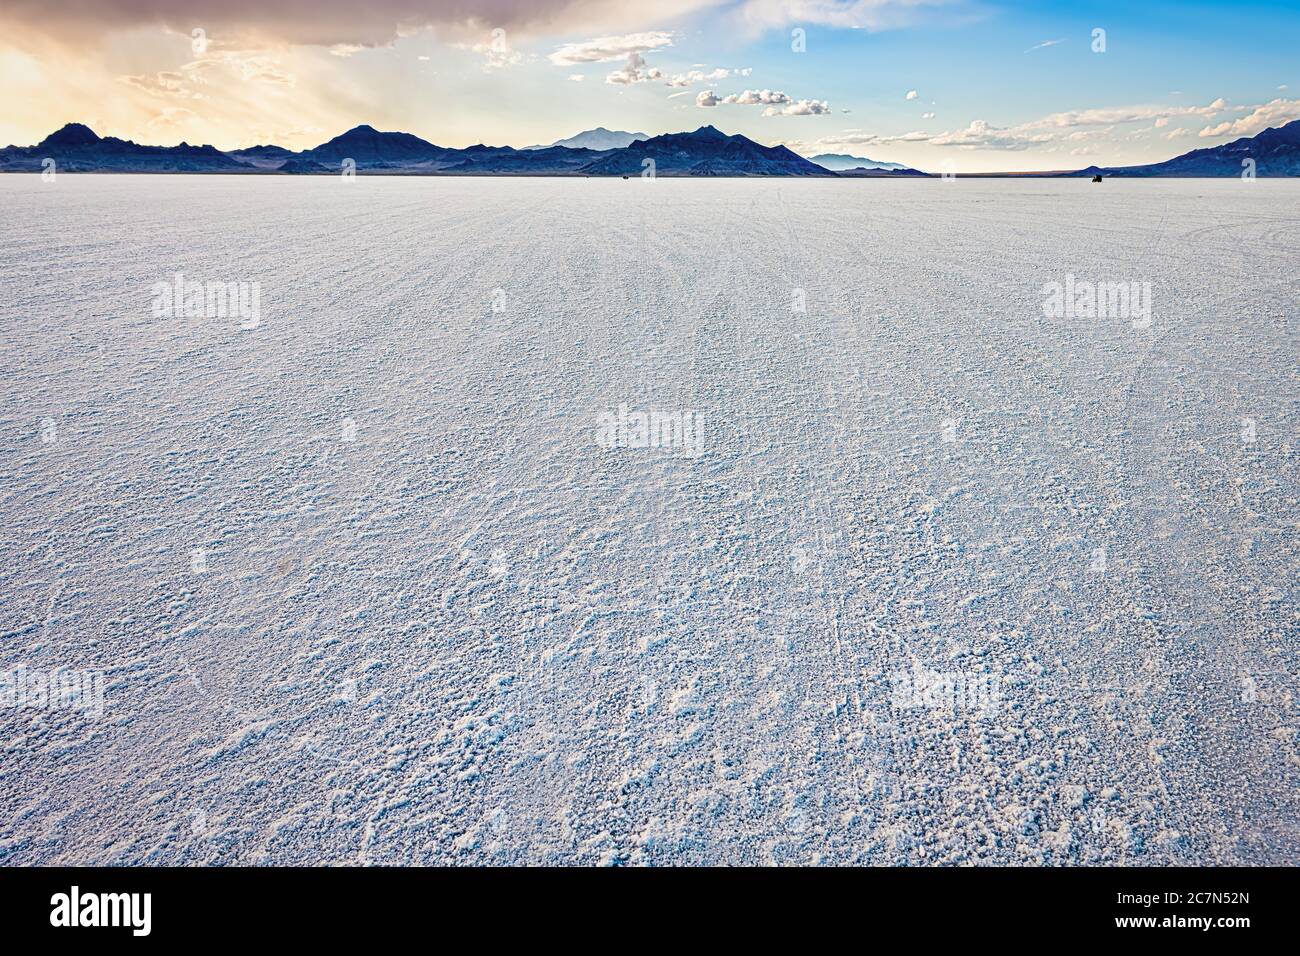 Bonneville Salt Flats wide angle view of texture at foreground and storm clouds near Salt Lake City, Utah and mountain view during sunset with nobody Stock Photo